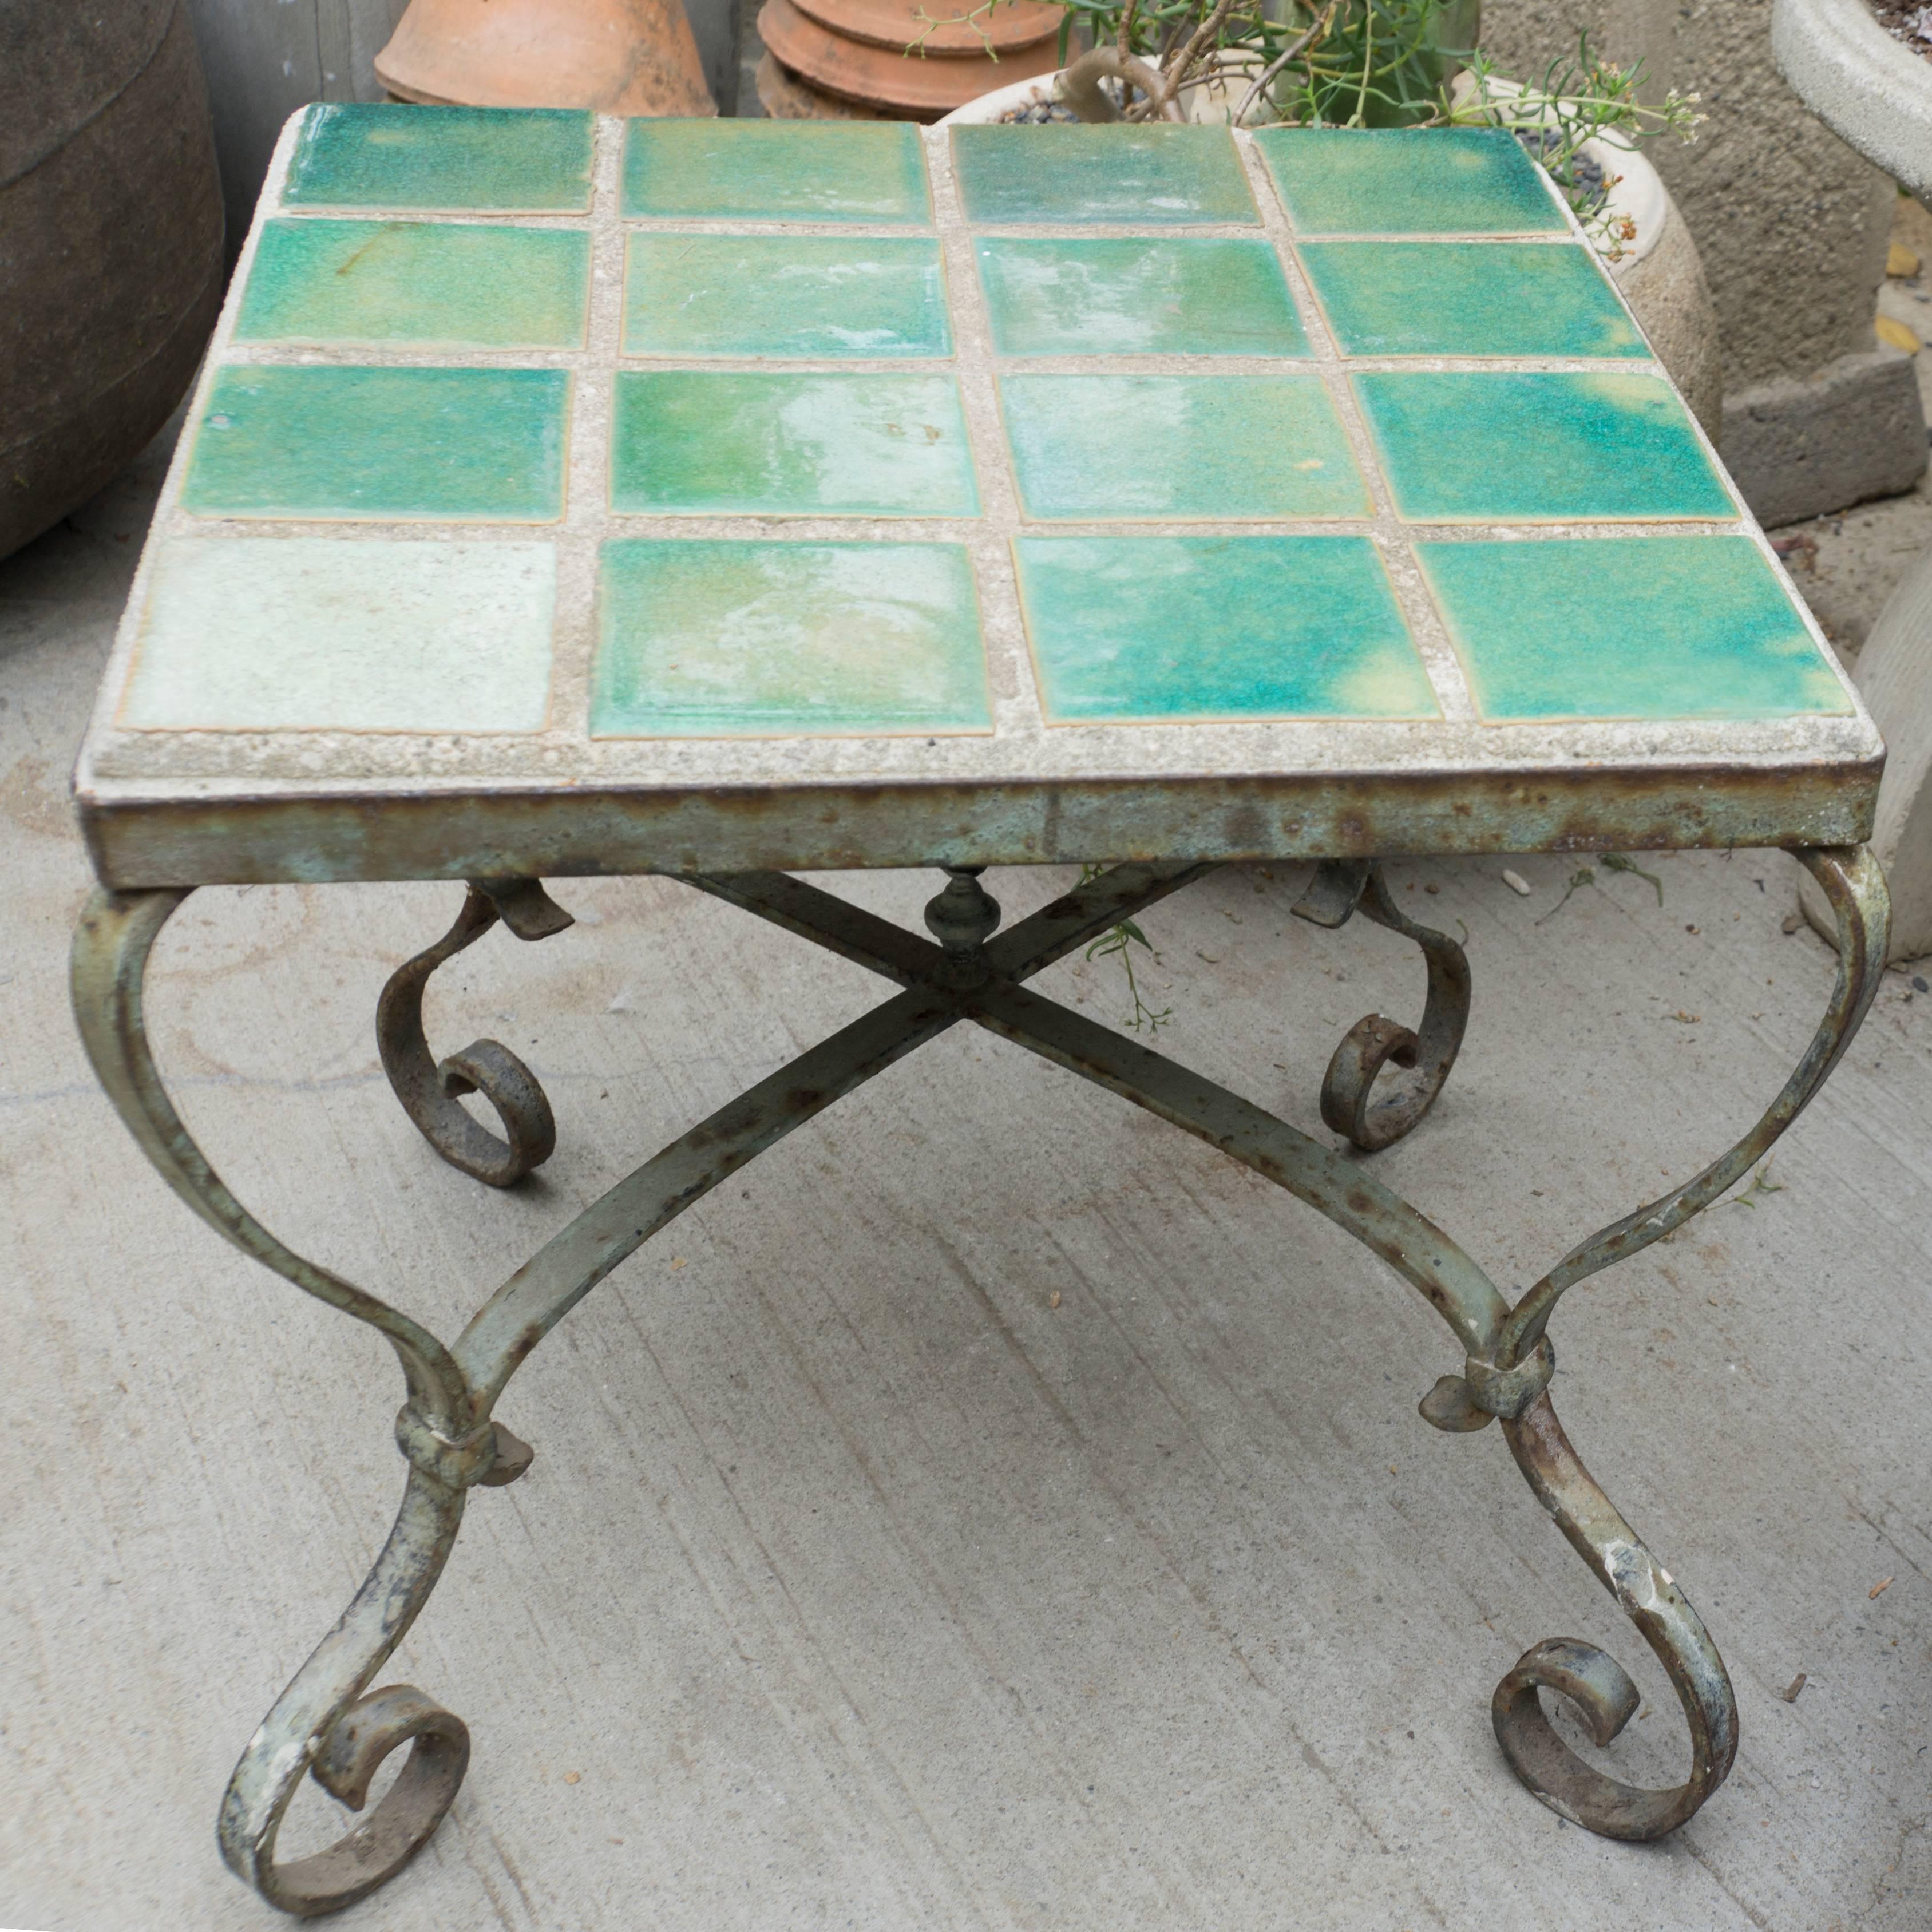 20th Century Vintage Cement, Tile, and Iron End Table